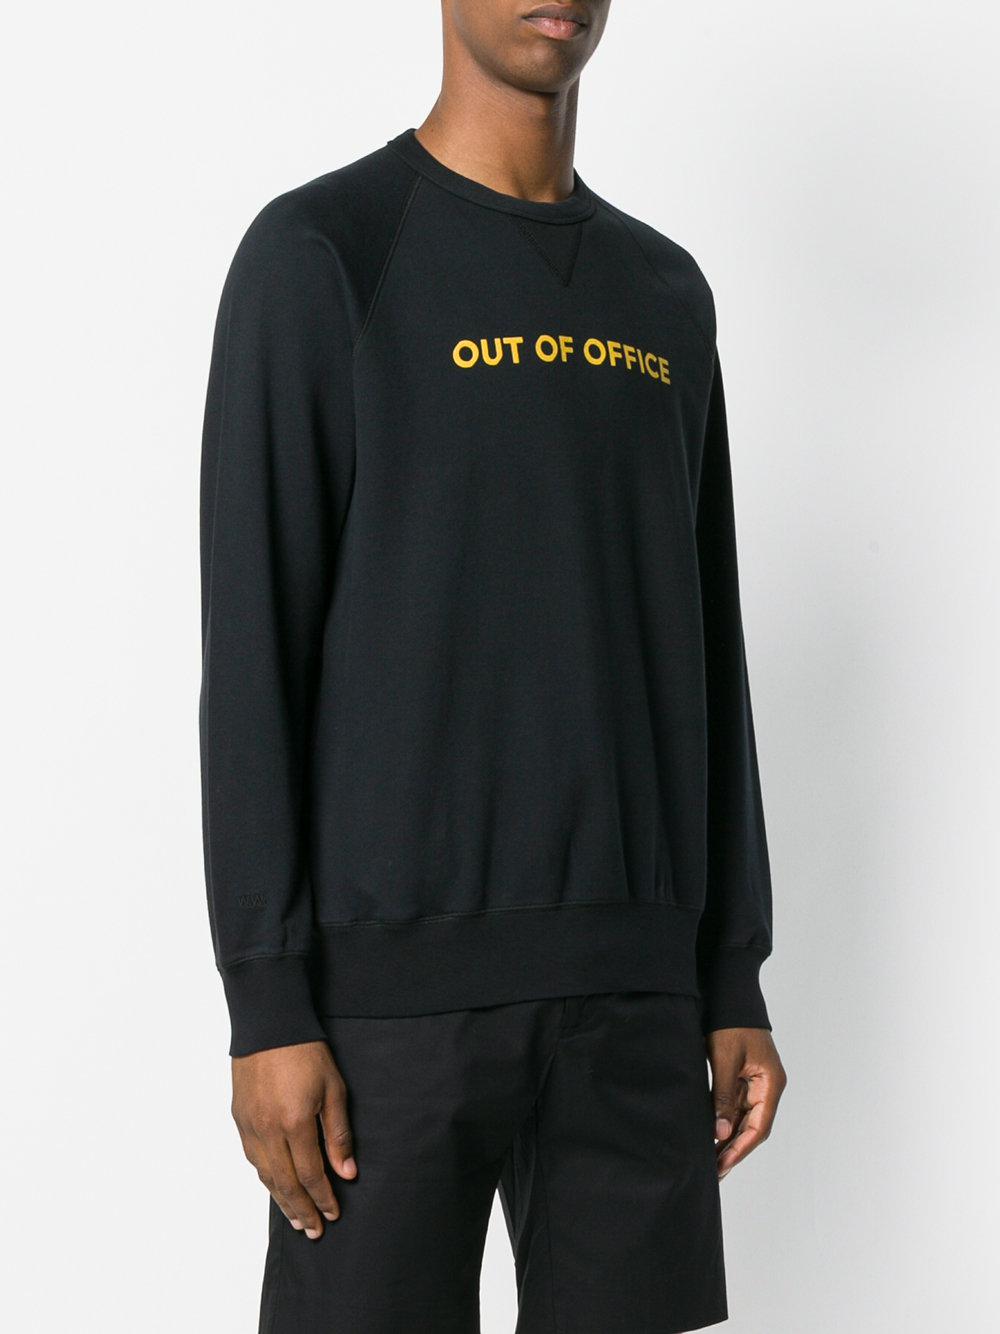 WOOD WOOD Cotton Hester "out Of Office" Sweatshirt in Black for Men | Lyst